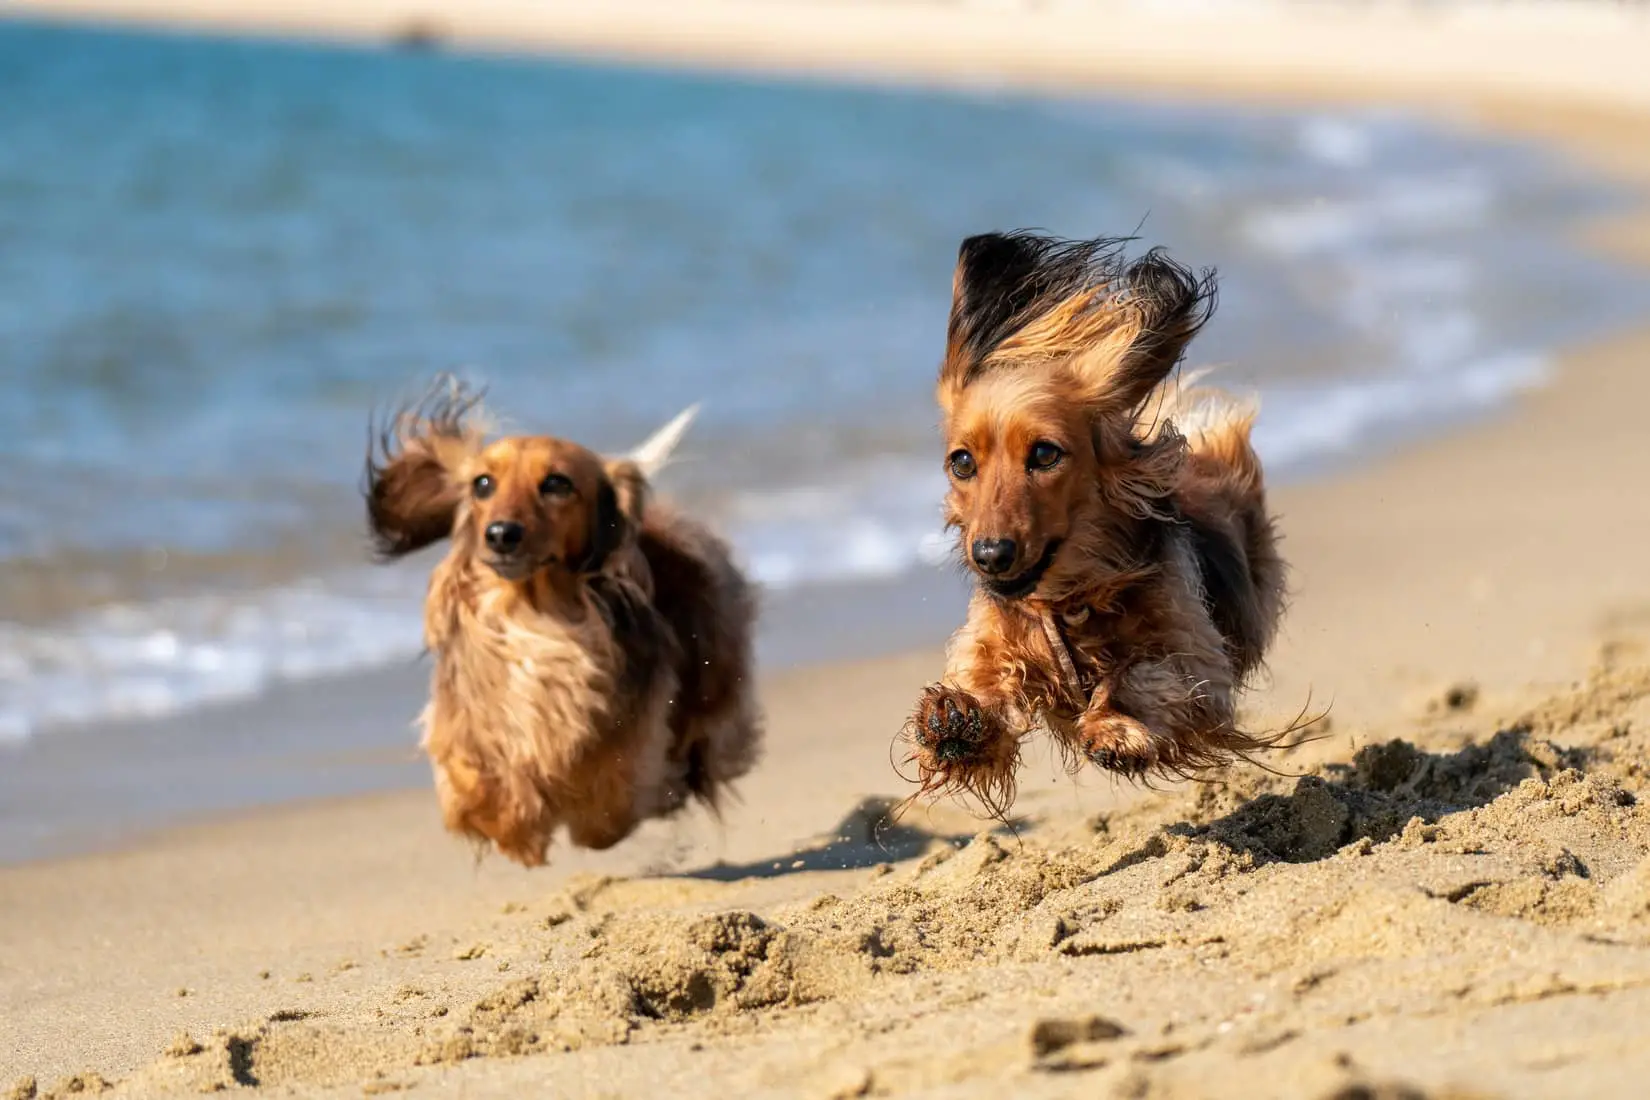 Two dogs running on a sandy beach